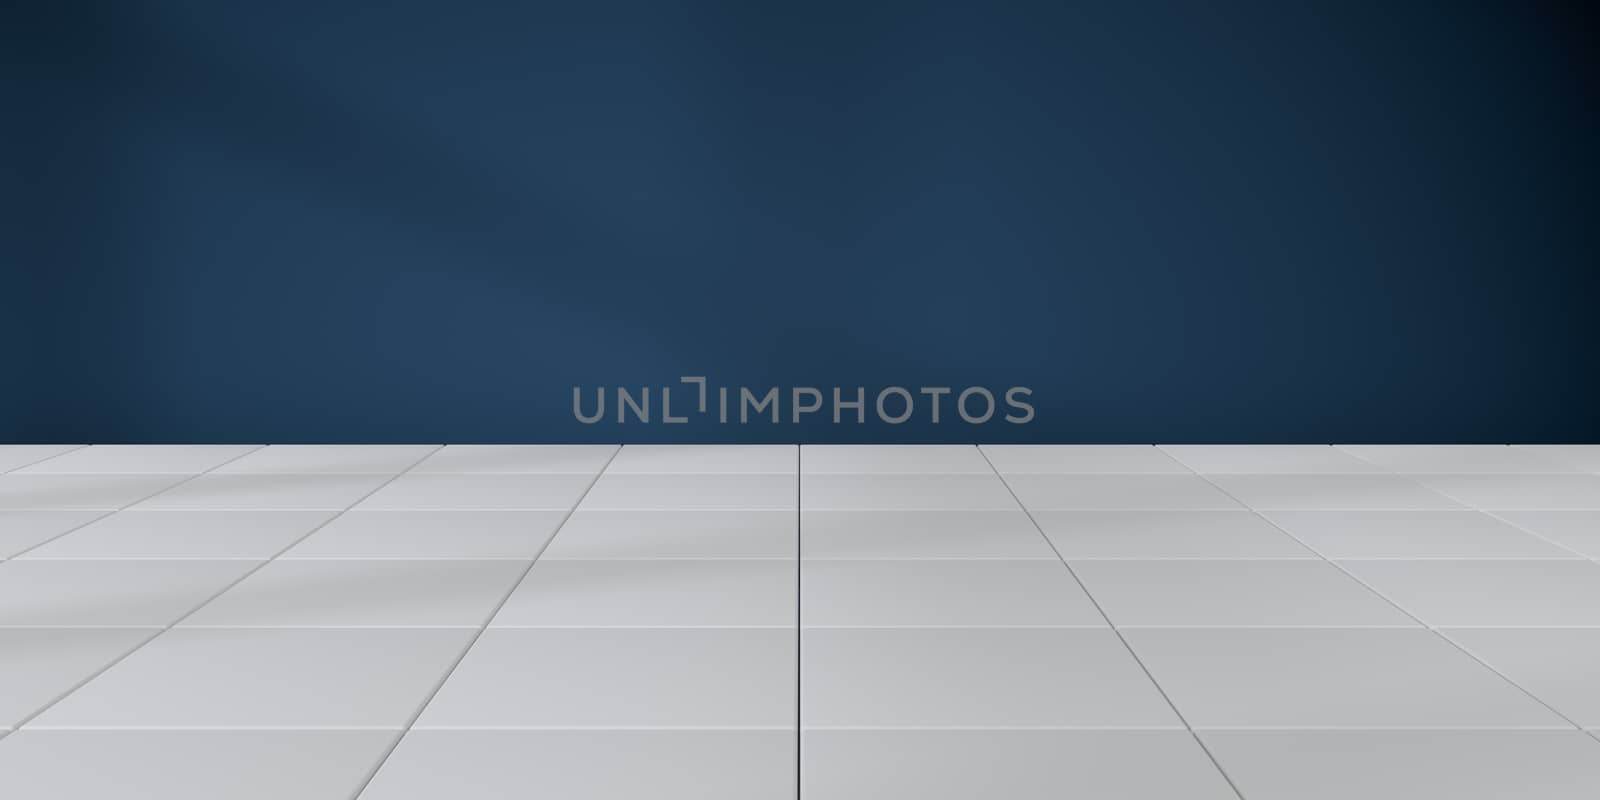 White cubic floor with blue wall background, 3d rendering. Computer digital drawing.